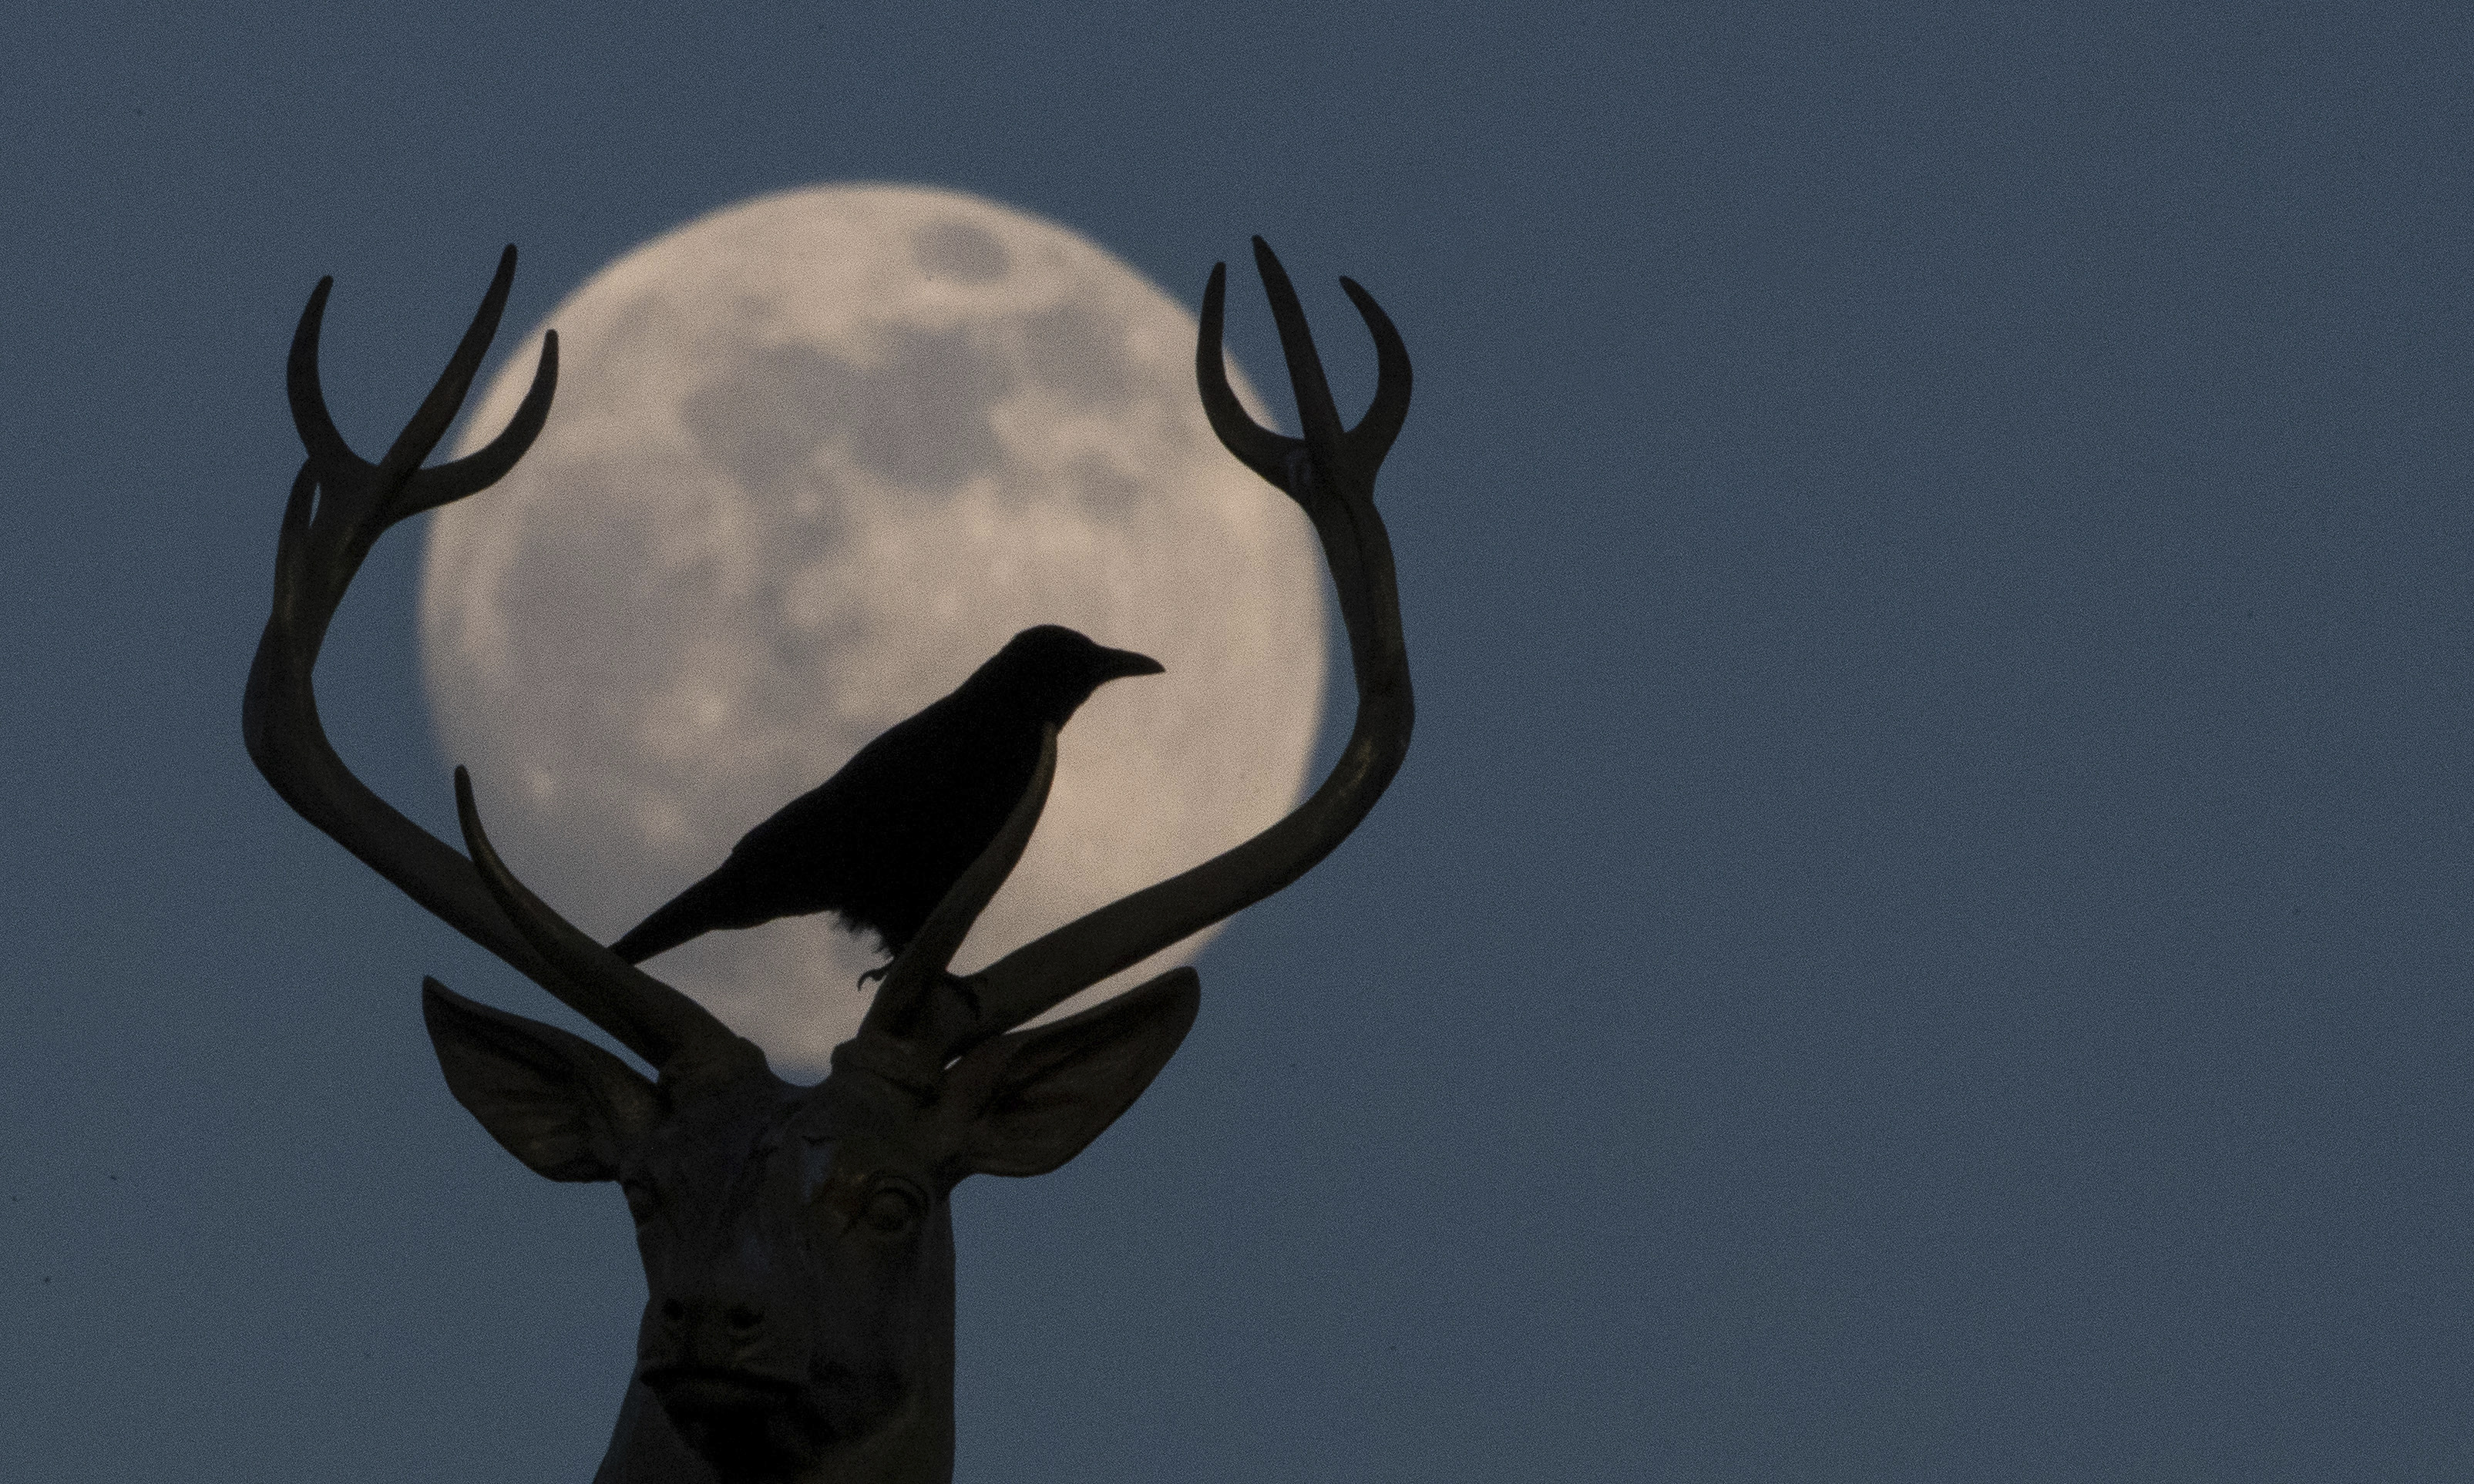 18 February 2019, Baden-Wuerttemberg, Stuttgart: A crow sits on the golden stag of the sculptor Ludwig Habich on the roof of the art building at the Schlo'platz in front of the almost full moon. (Sebastian Gollnow—Sebastian Gollnow/picture-alliance/dpa/AP Images)